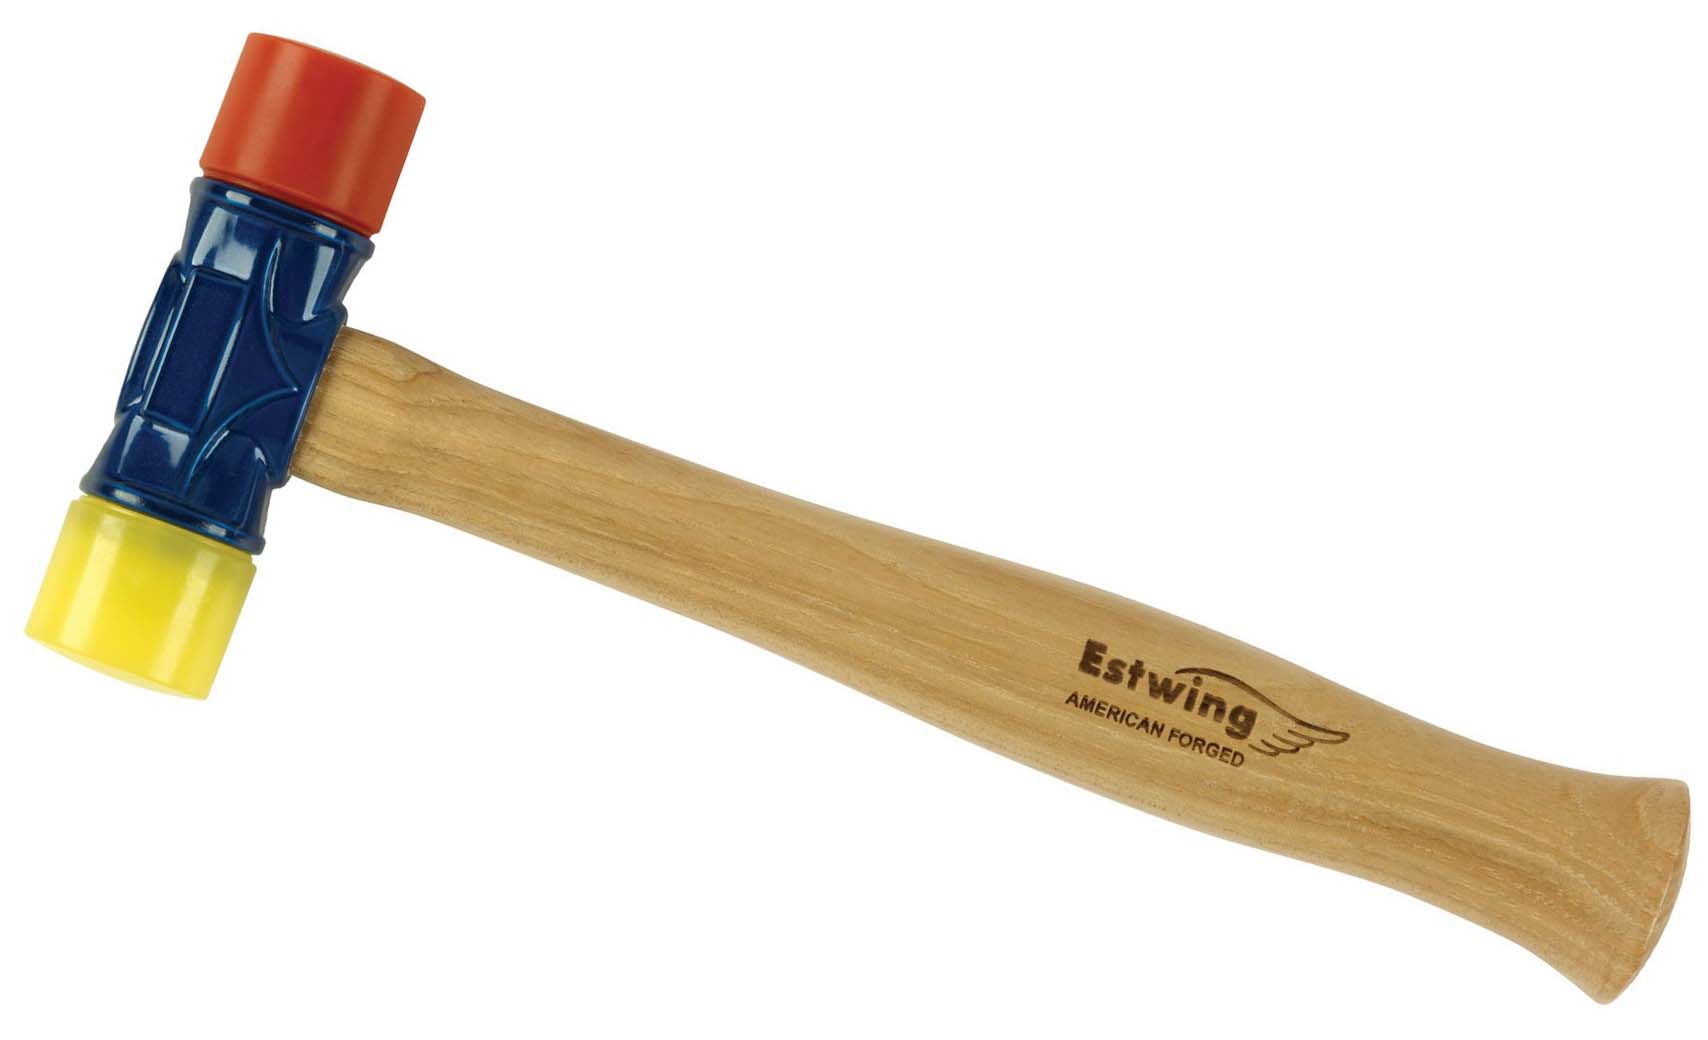 estwing 12 oz rubber mallet with wood handle